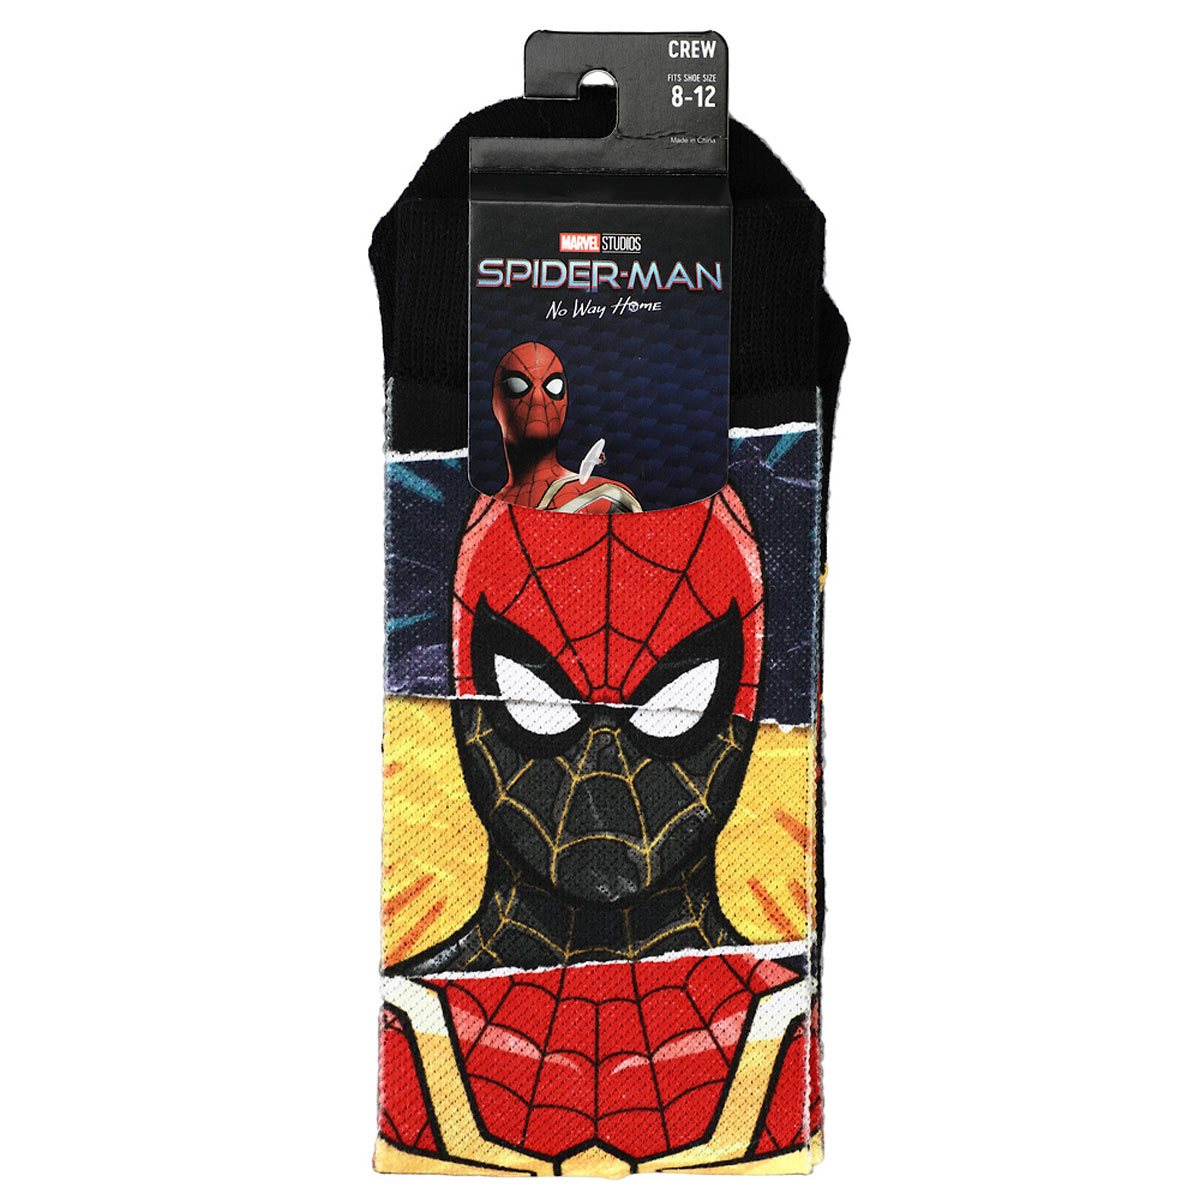 Spider-Man: Across the Spider-Verse Crew Sock 3-Pack